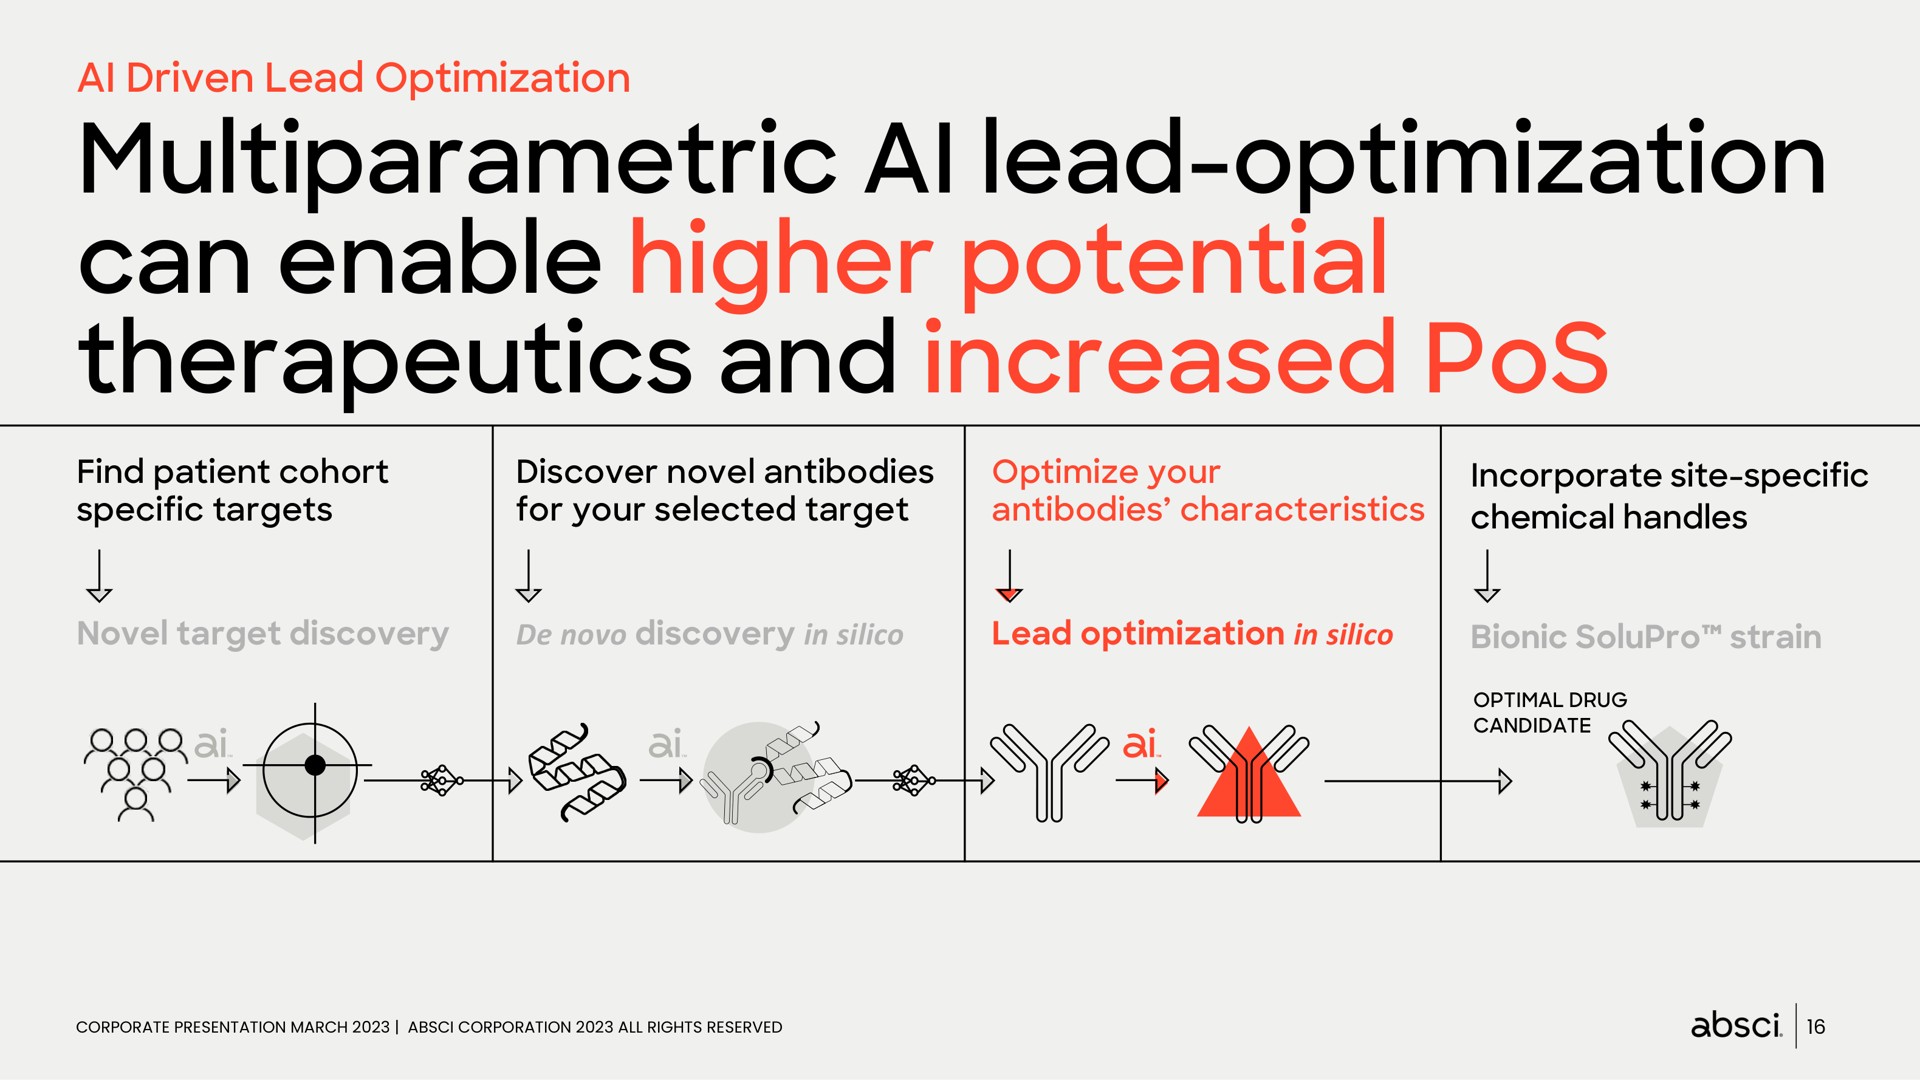 lead optimization can enable higher potential therapeutics and increased pos pep we | Absci